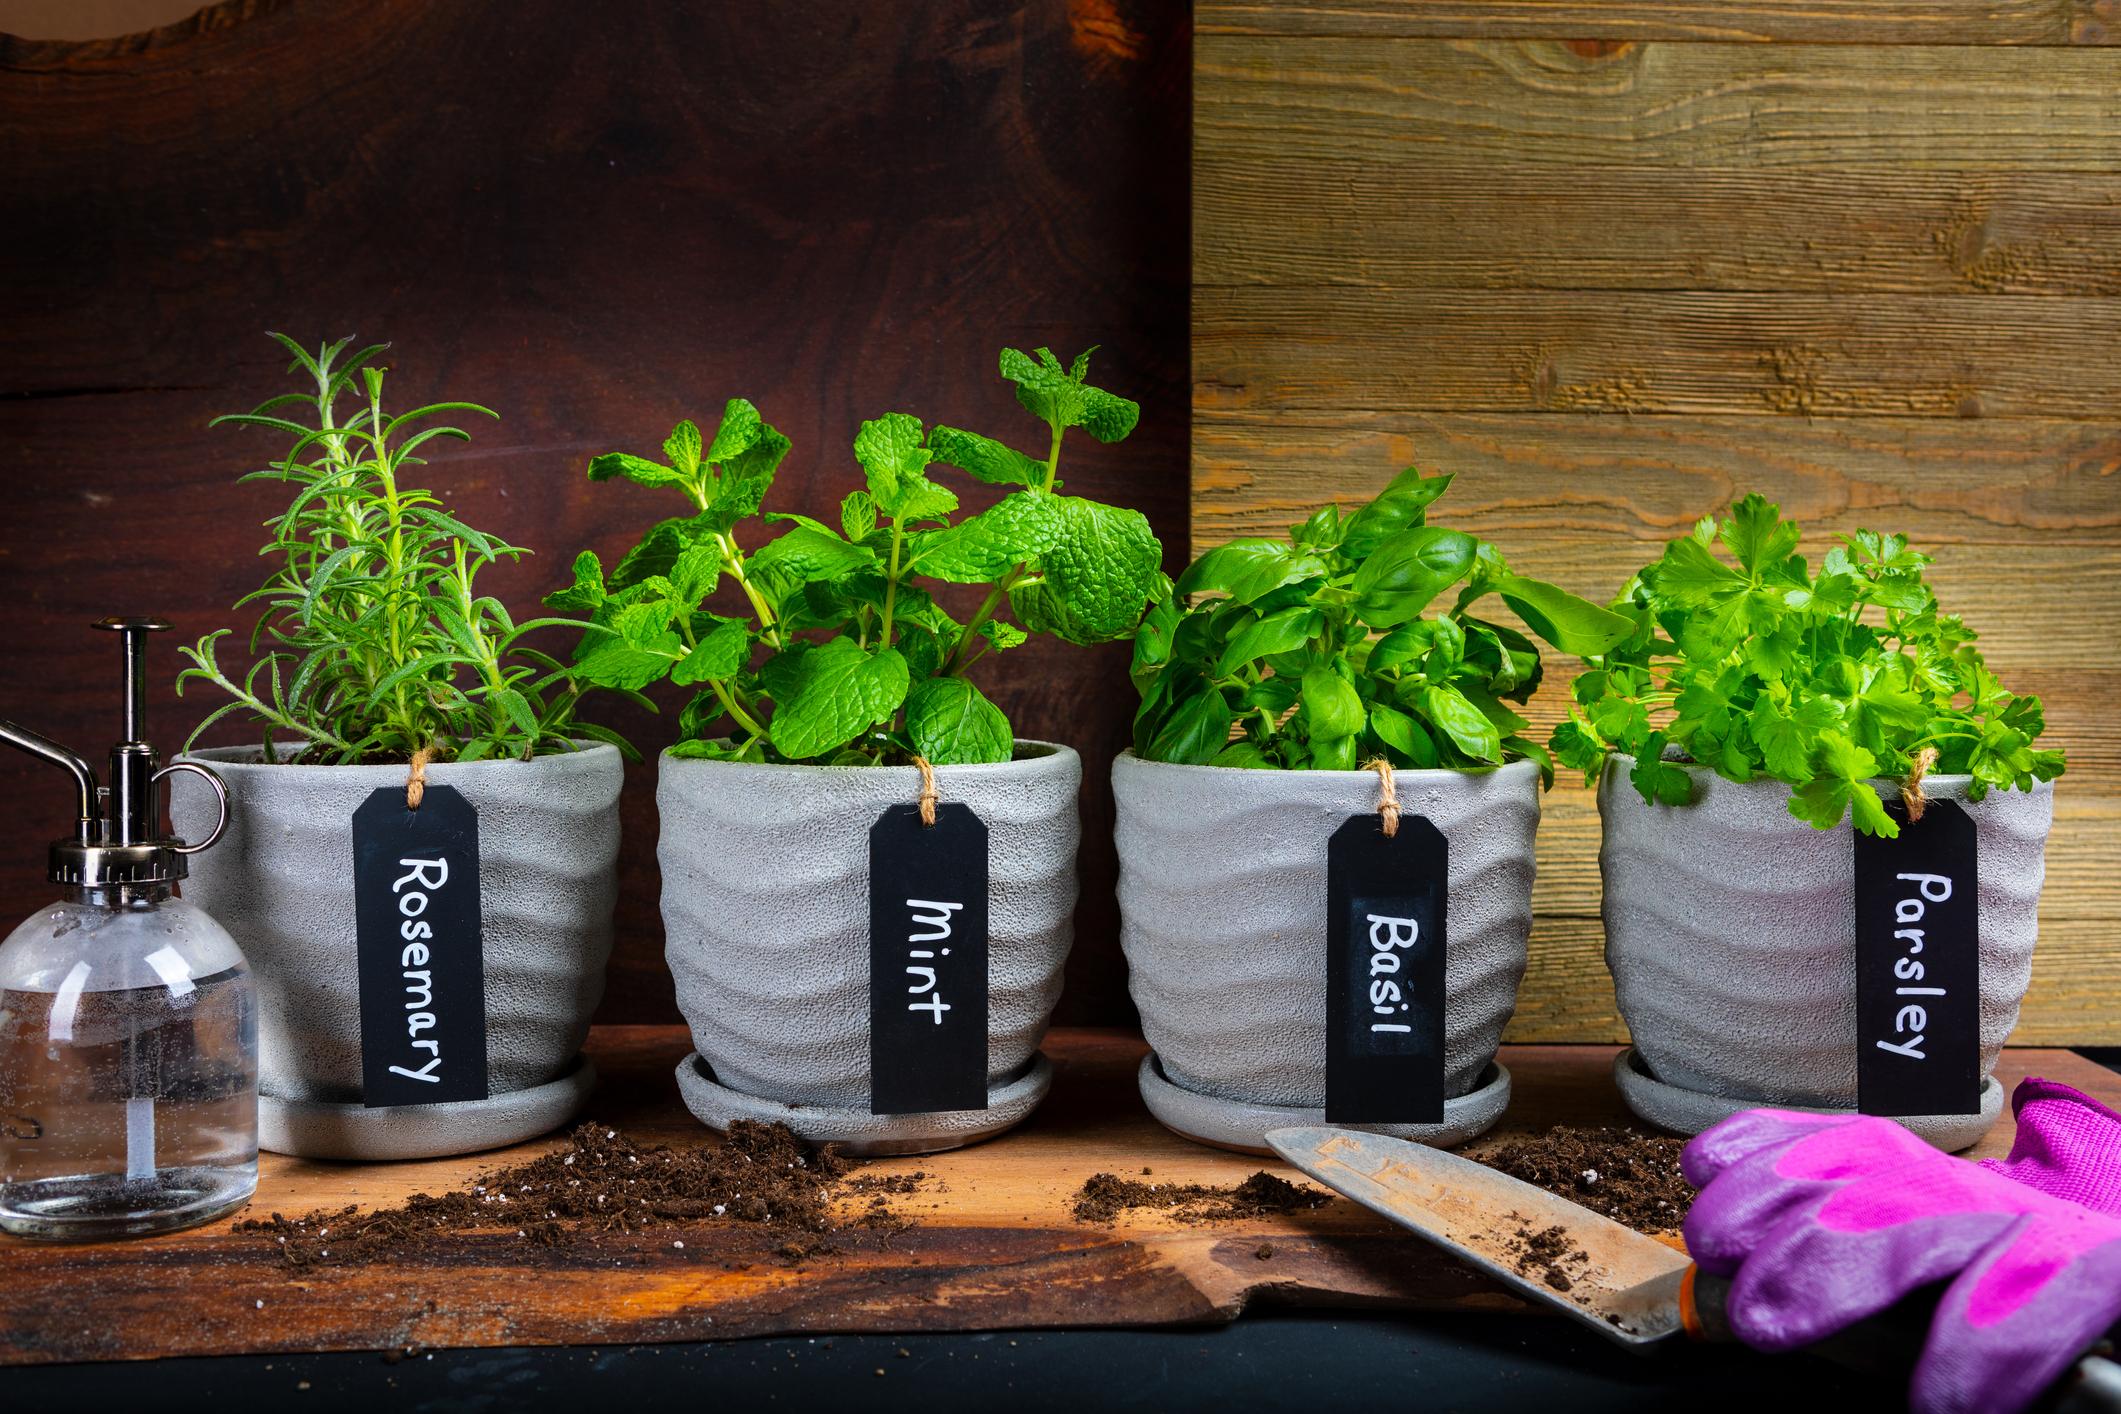 Variety of Indoor Herb Plant Garden in Flower Pots on a table (Photo: iStock - EJGrubbs)